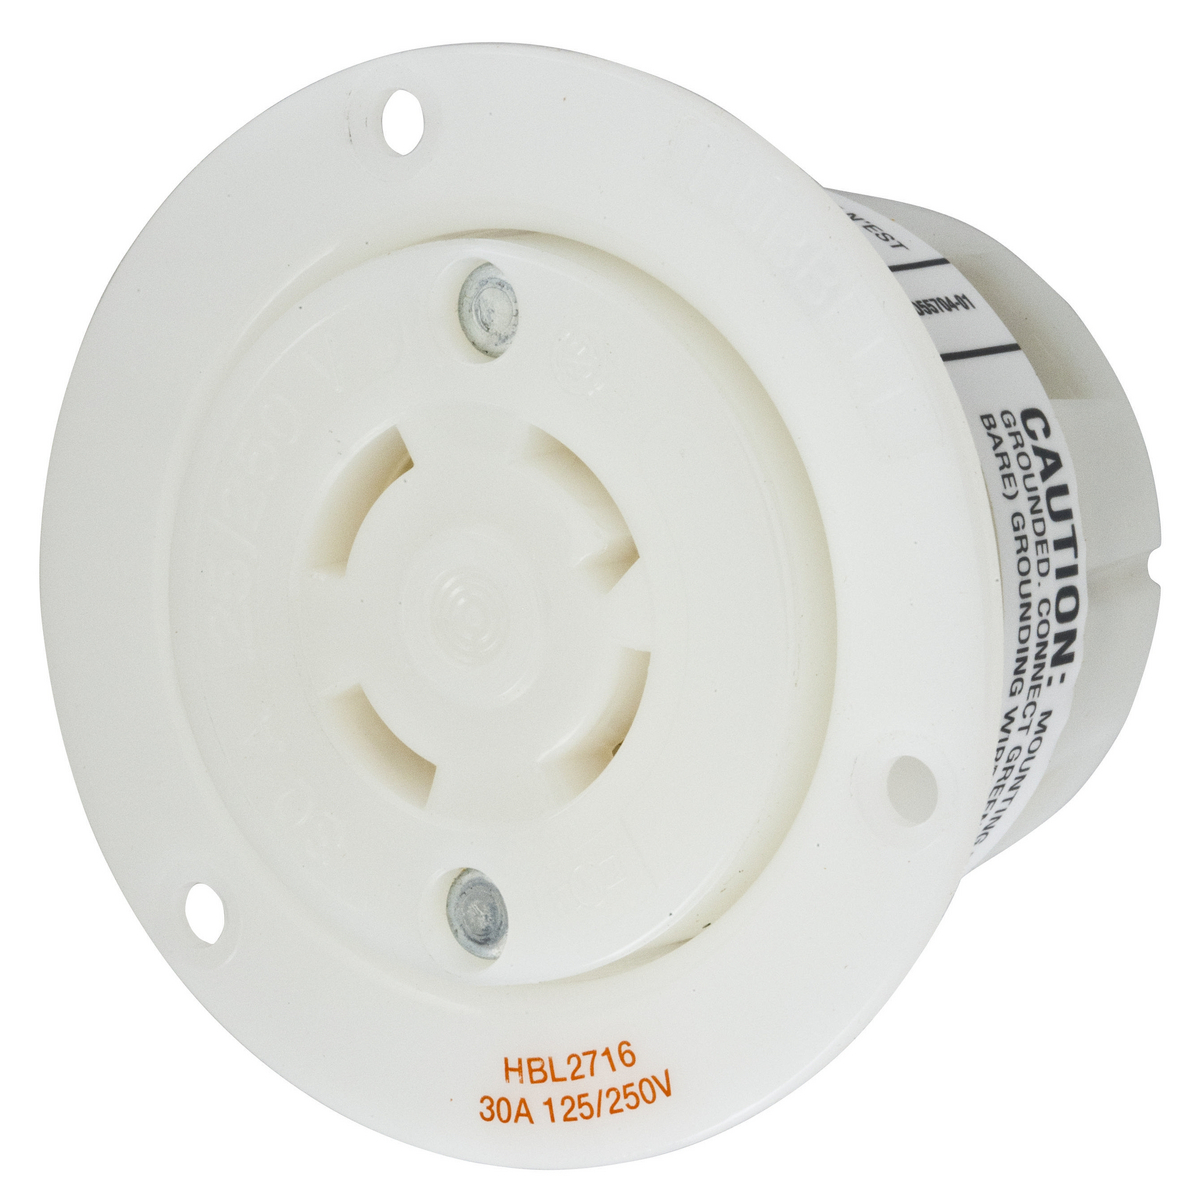 HBL2716 Locking Flanged Receptacle Hubbell Wiring Device-Kellems